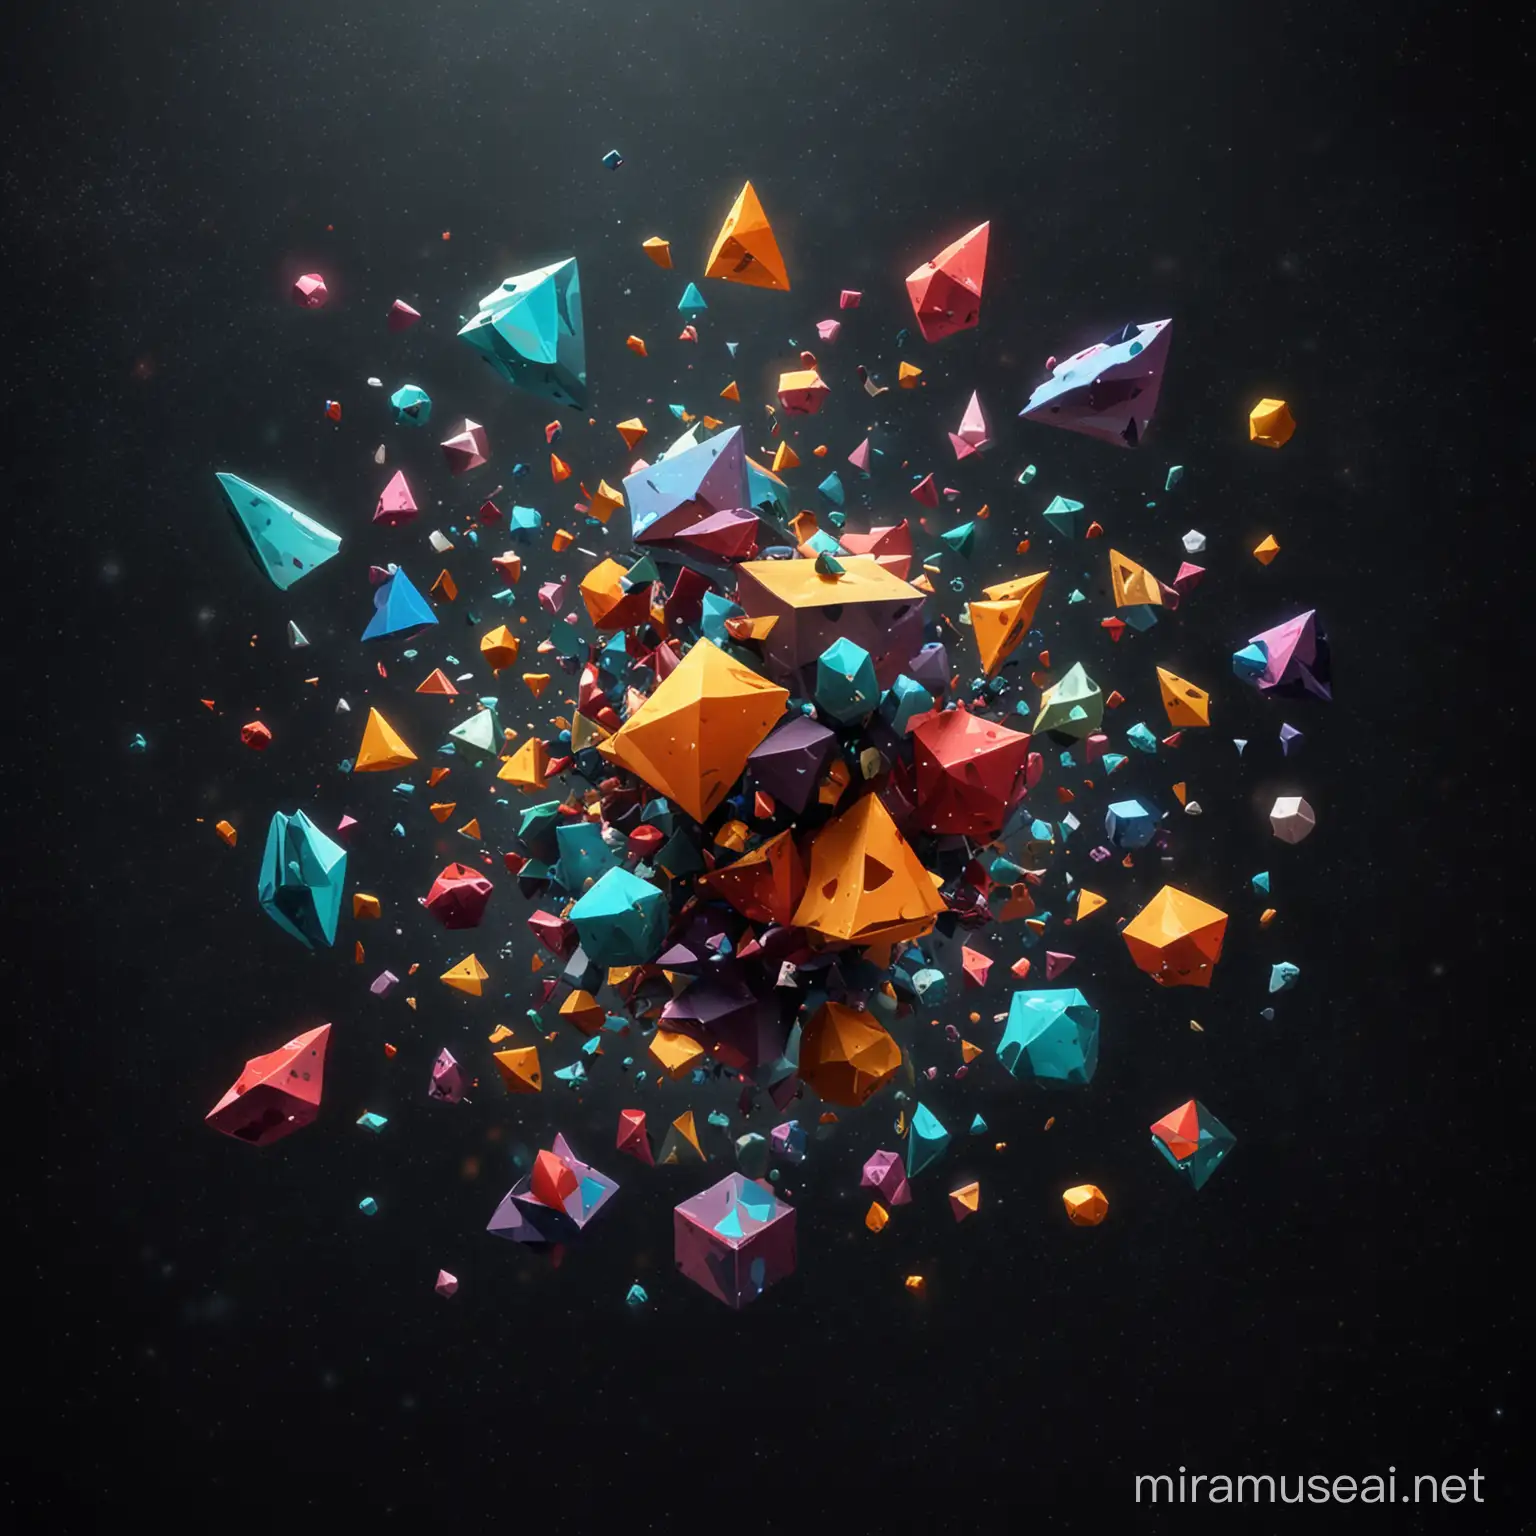 Colorful shapes floating in space, dark background